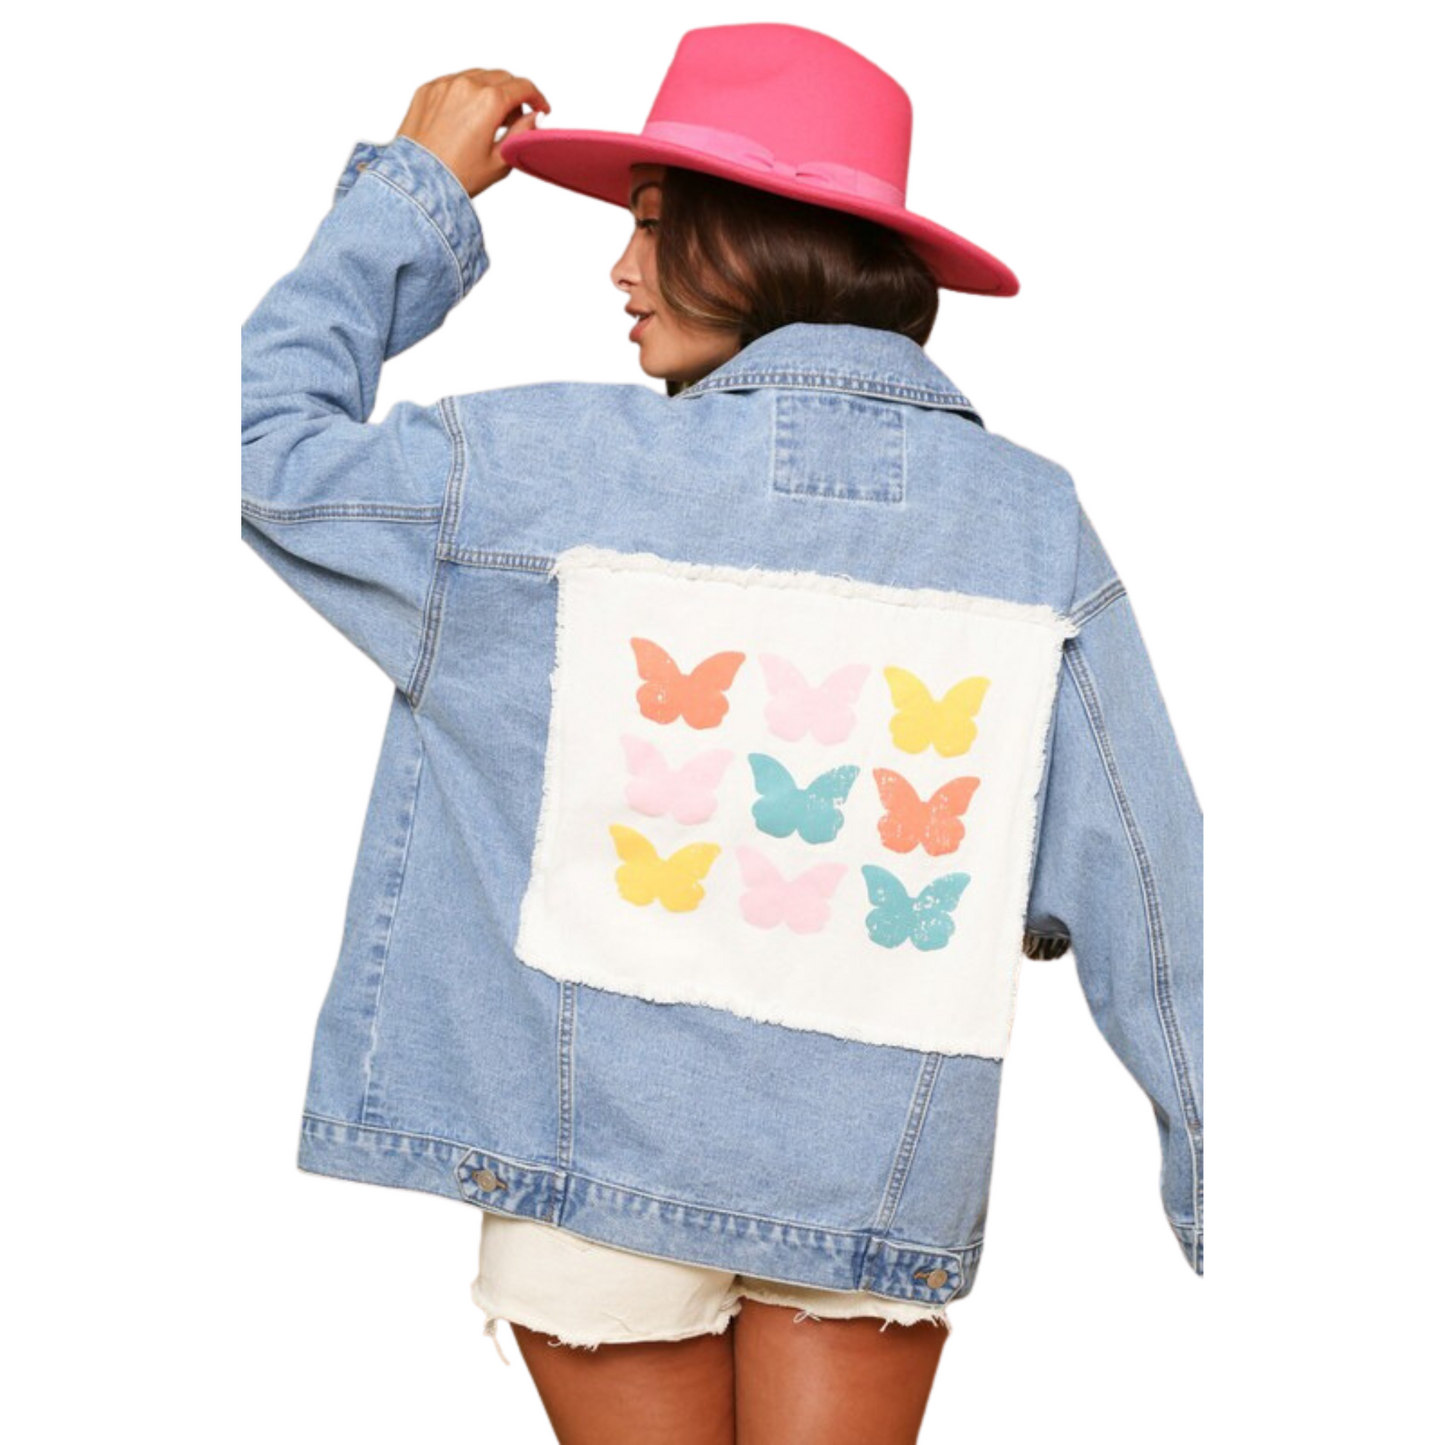 This stylish patch denim jacket is the perfect statement piece for your wardrobe. Crafted from quality denim, it features a multicolor butterfly graphic and is secured with button fastenings. Wear it for a trend-right look.